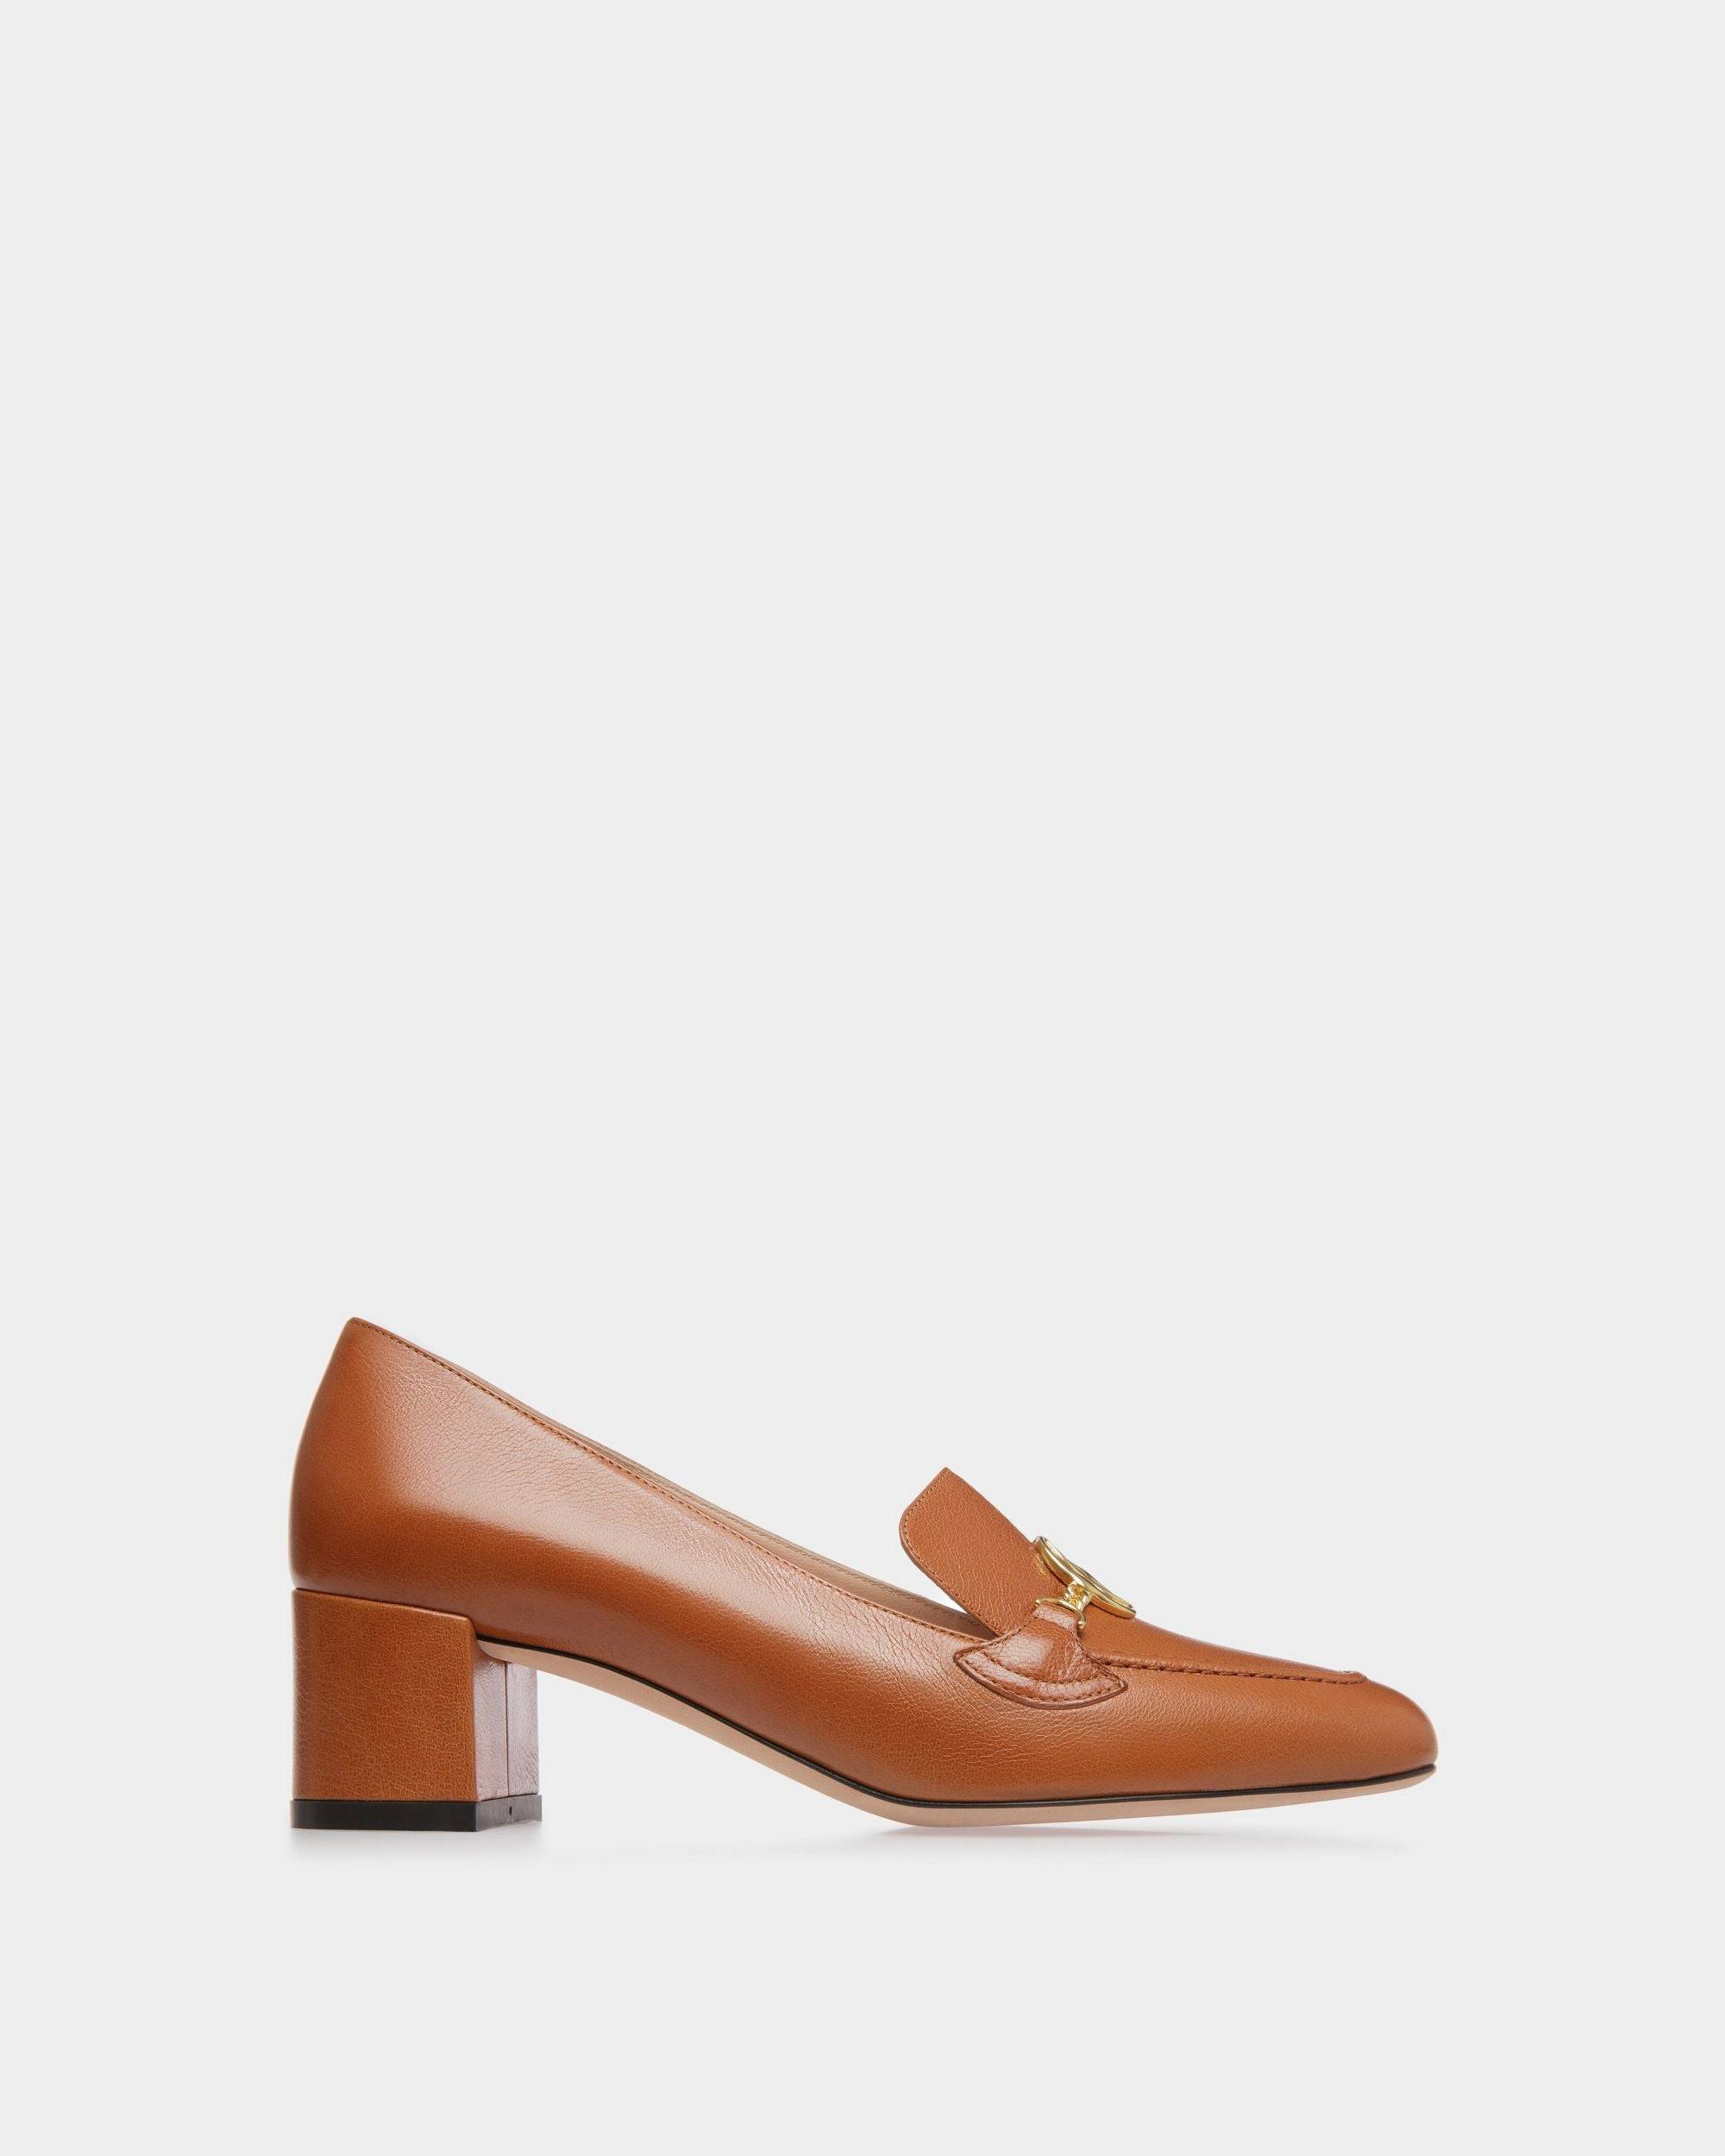 Women's Emblem Pumps In Brown Leather | Bally | Still Life Side